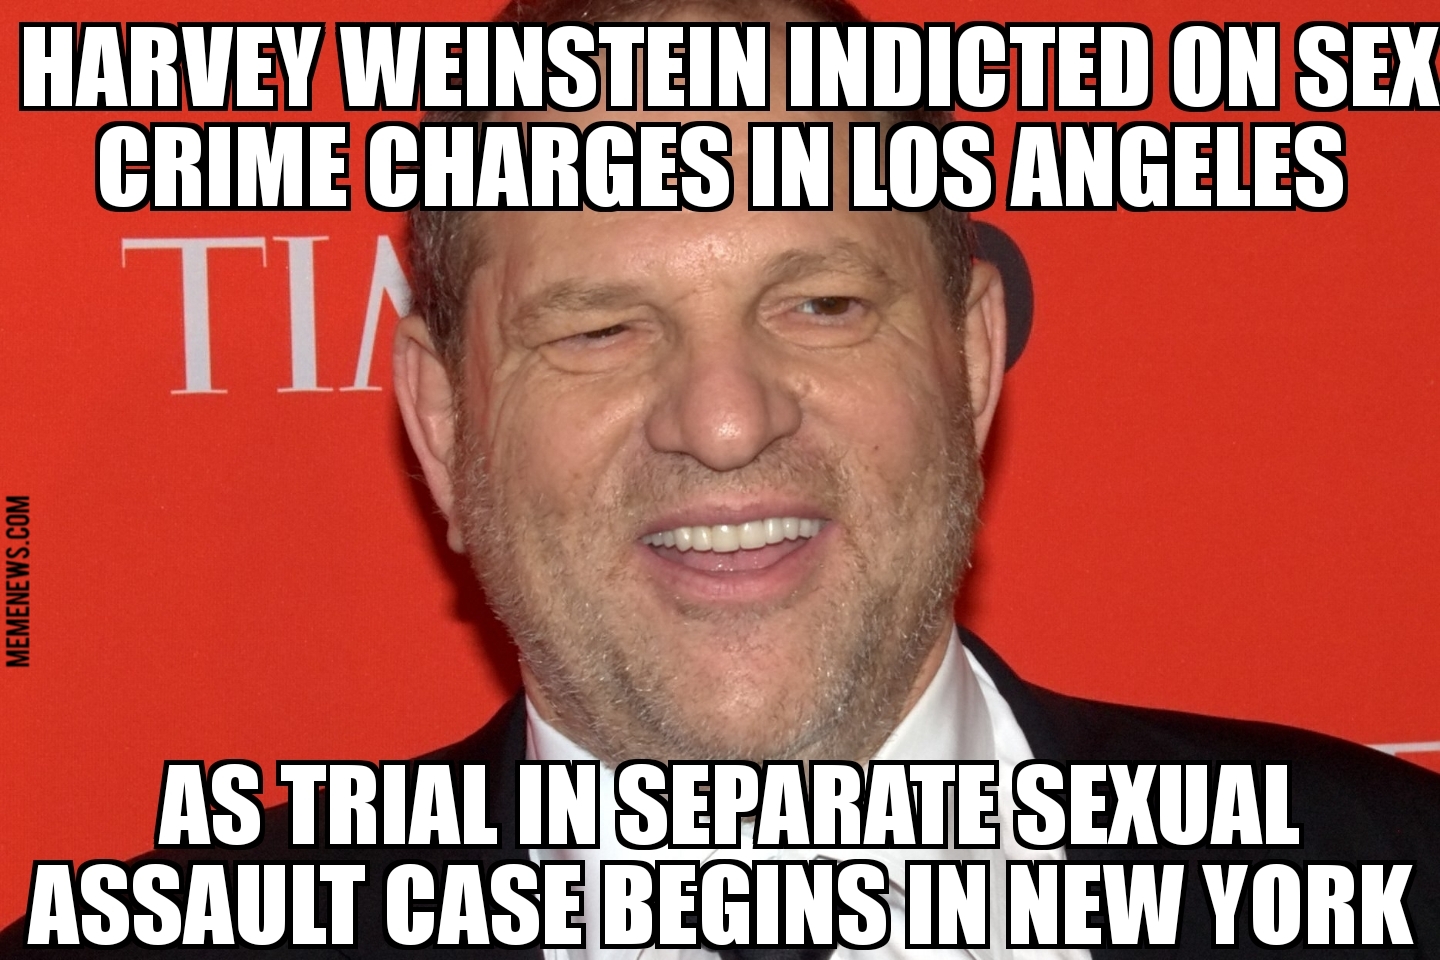 Harvey Weinstein indicted on sex crime charges in Los Angeles